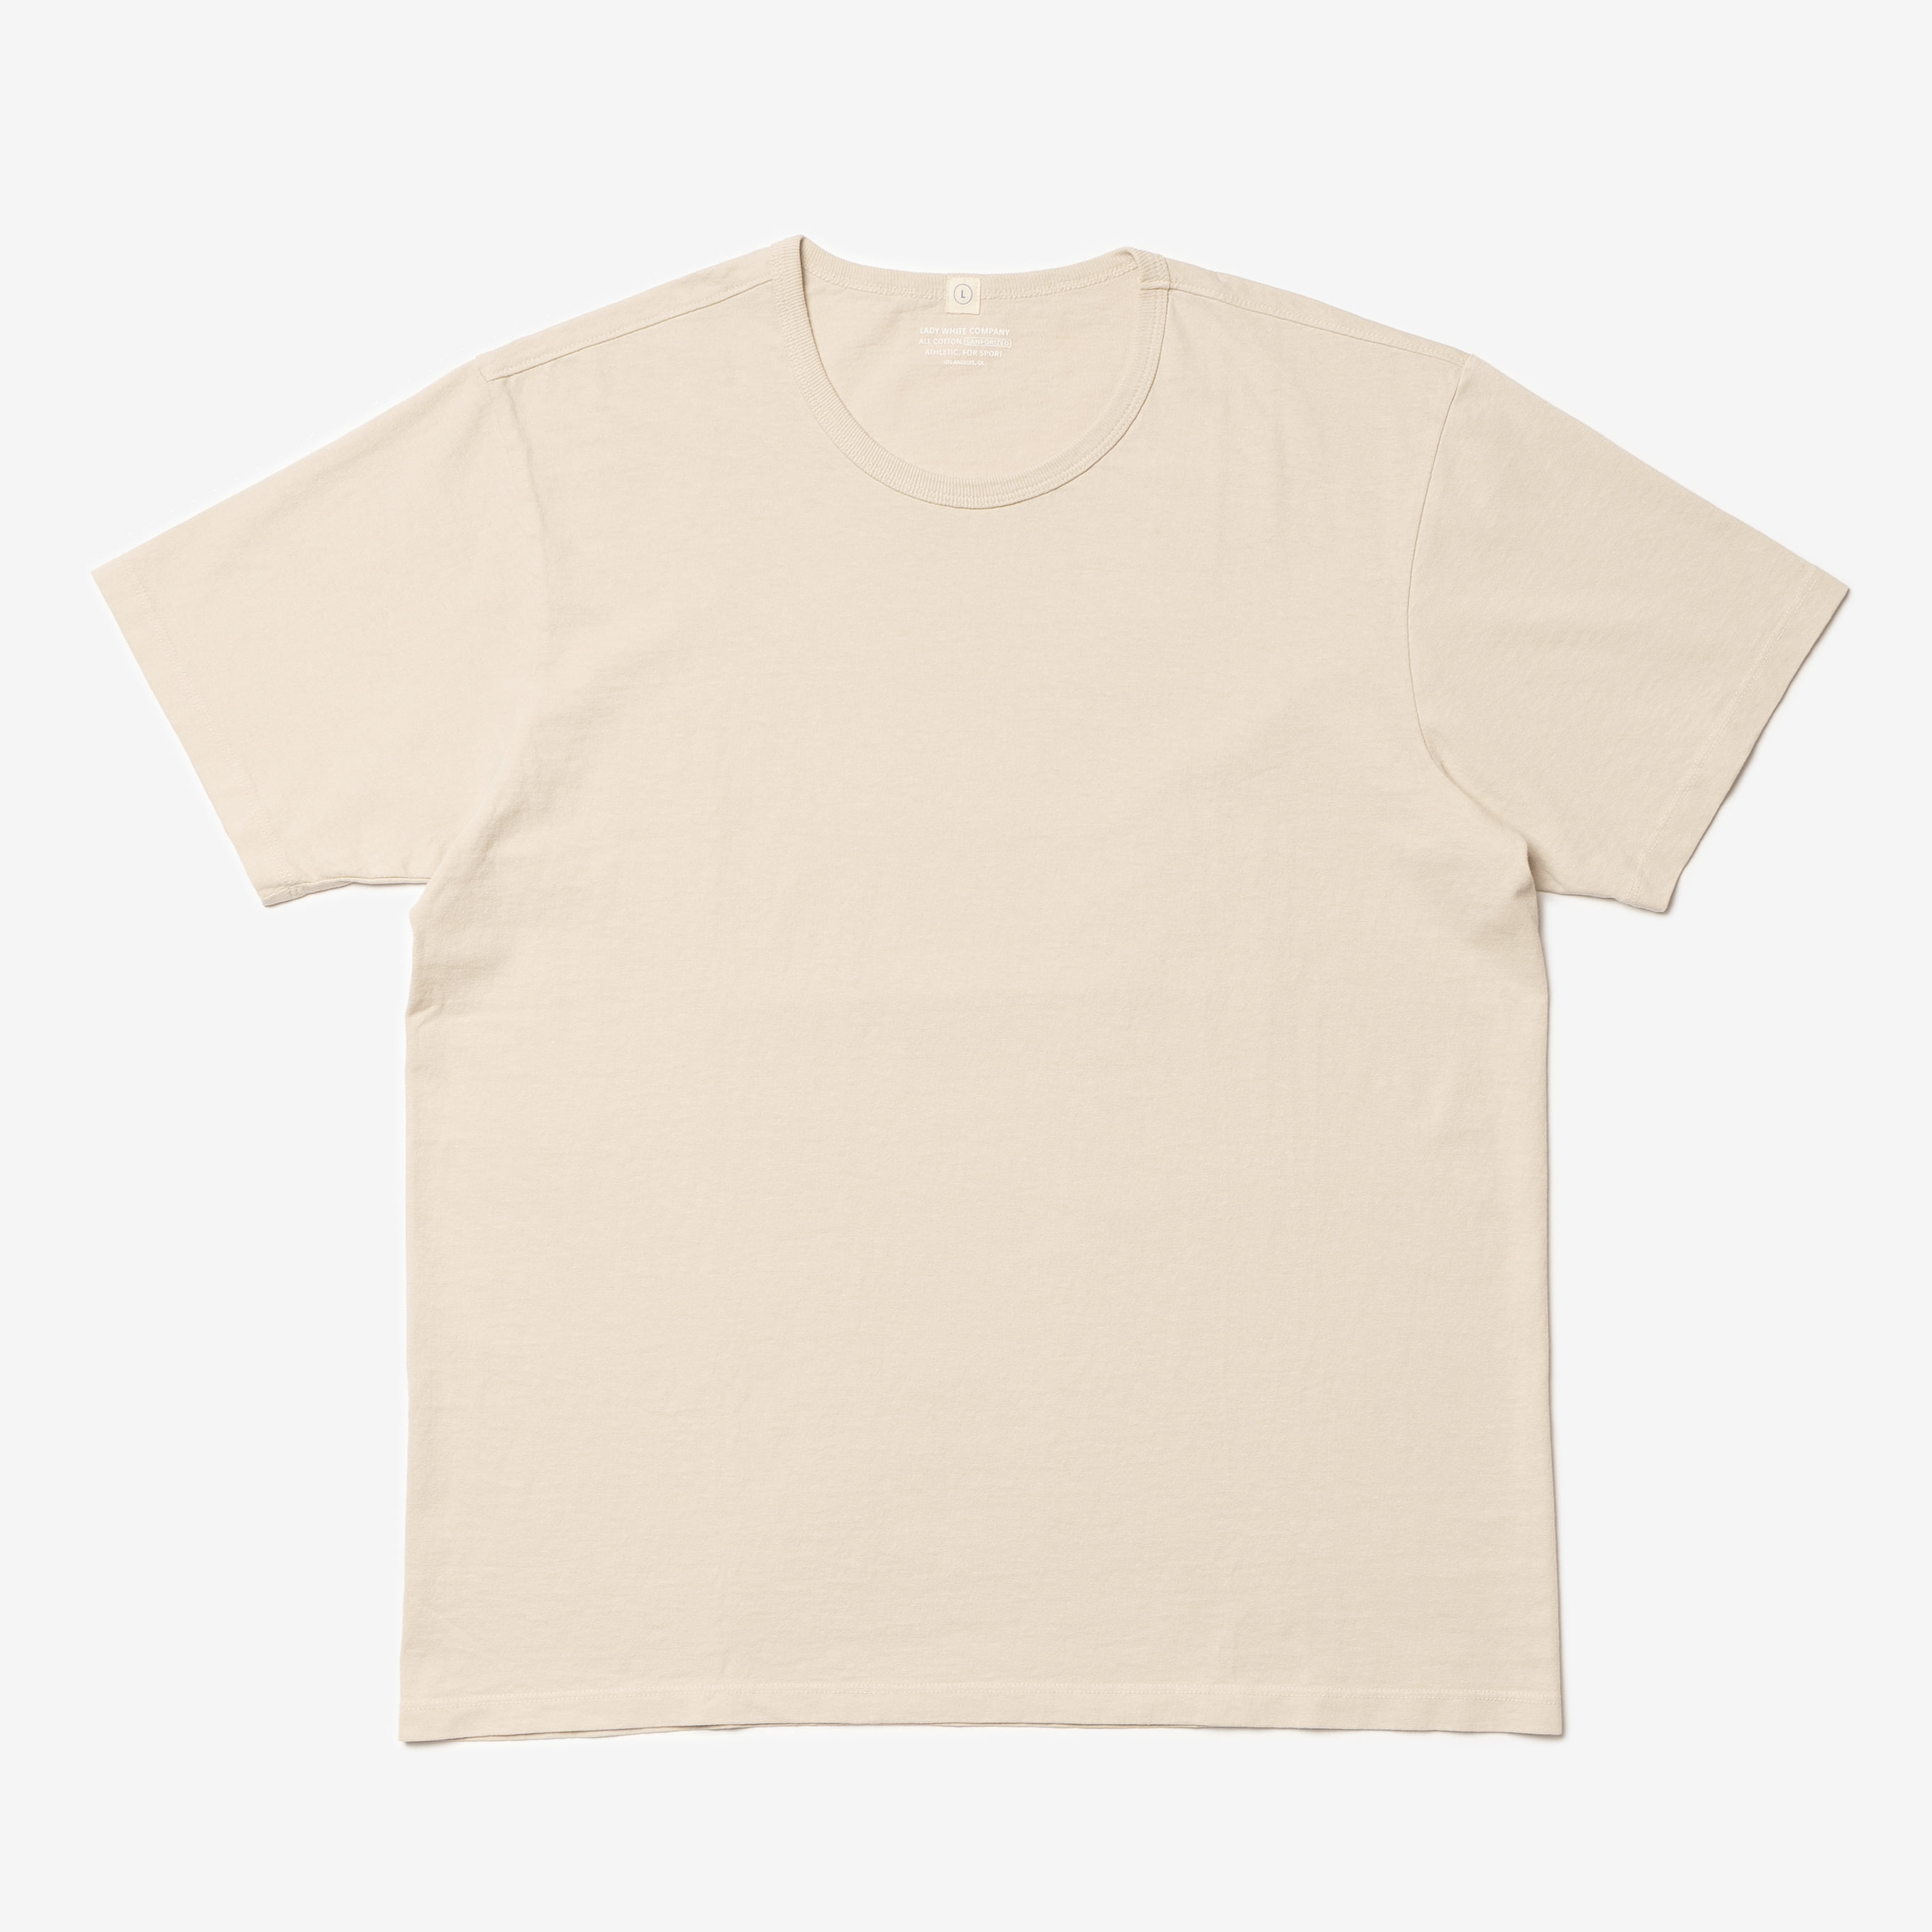 Lady White Co - Our T-Shirt (Natural)